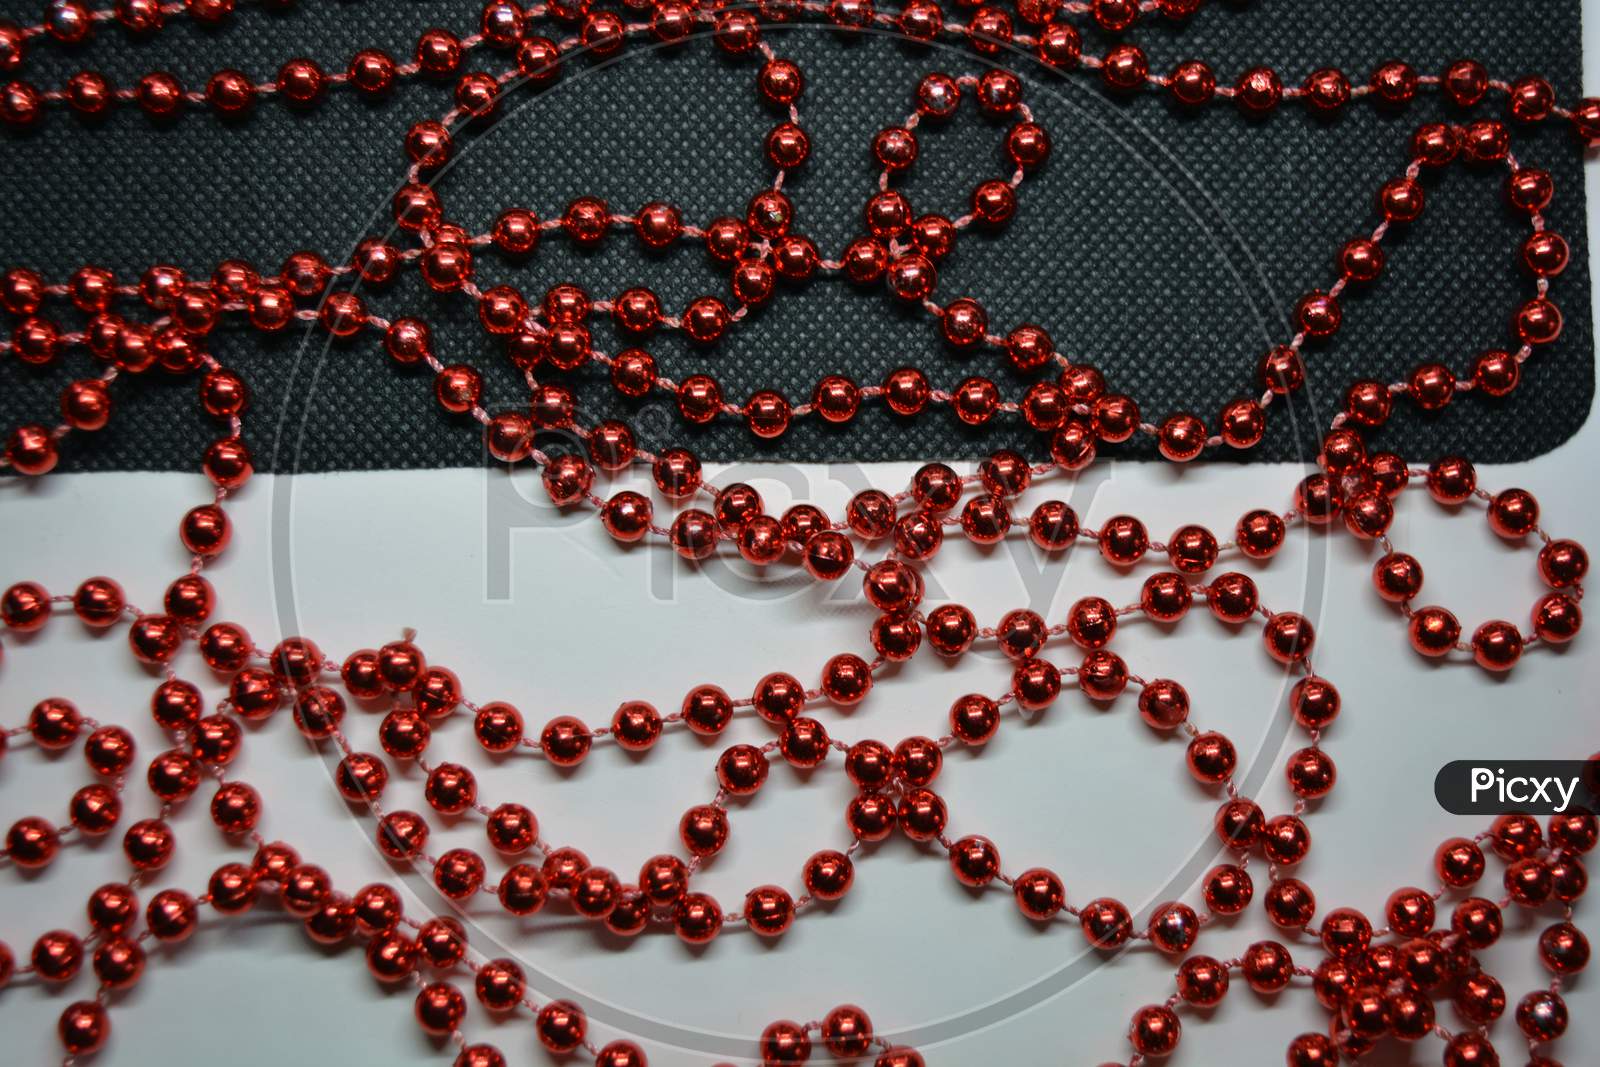 abstract, art, bead, beads, berry, celebration, christmas, coffee, color, concept, currant, day, decoration, design, detail, ed, fashion, food, frame, fruit, gift, glass, healthy, heart, holiday, illustration, jewelry, light, love, material, nature, necklace, ornament, pattern, people, red, reflecti